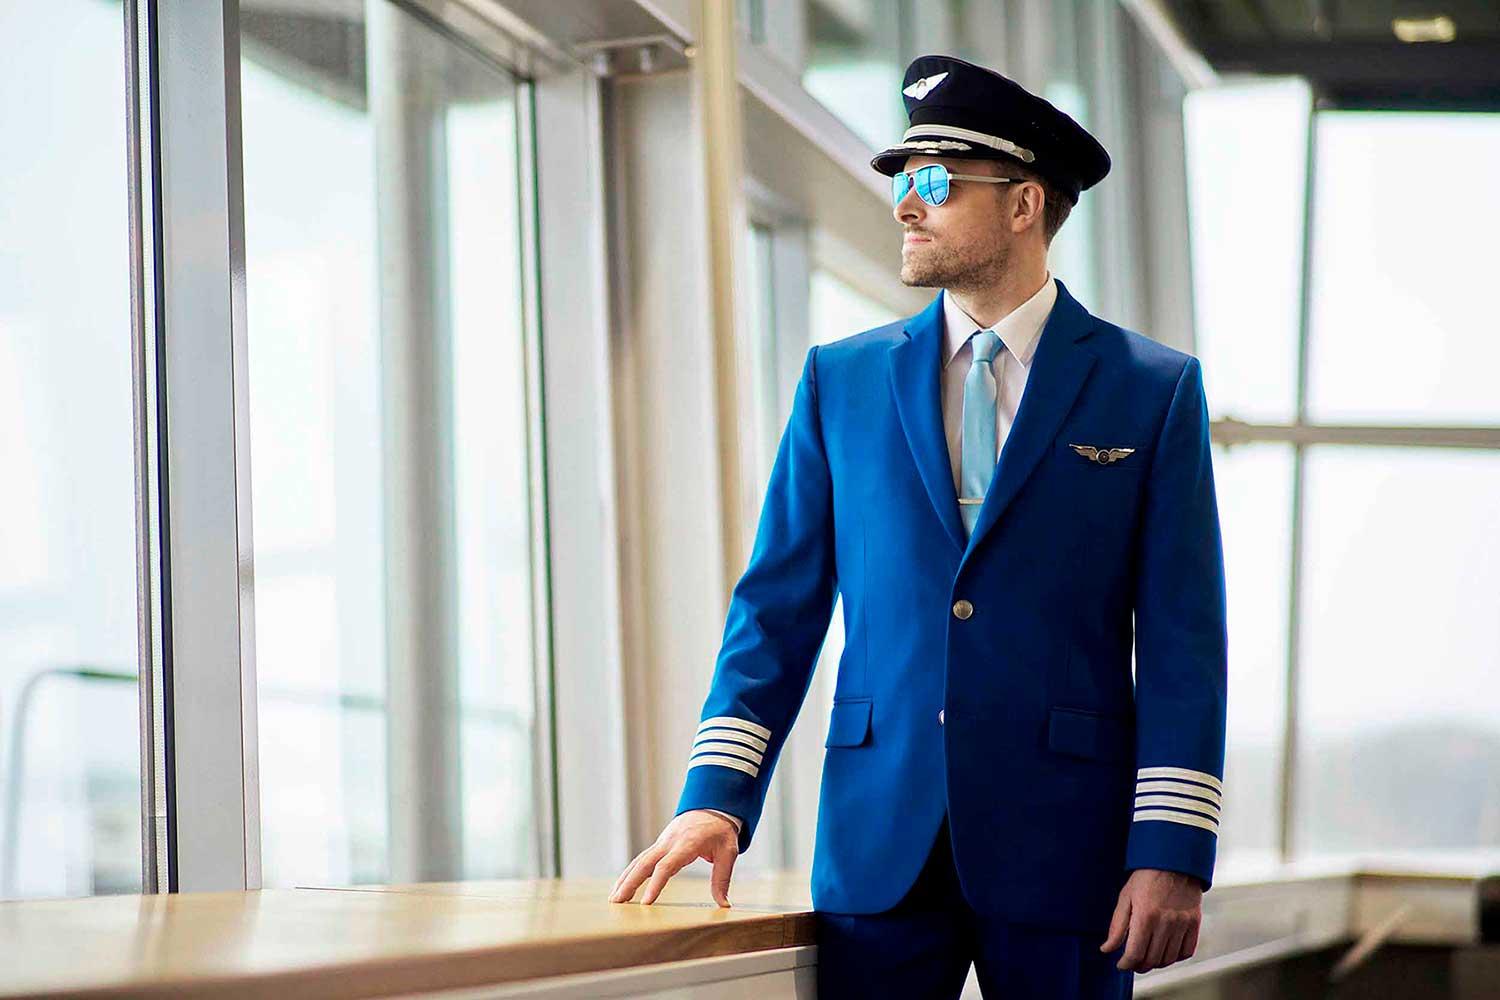 Inspiration for new Airline uniforms